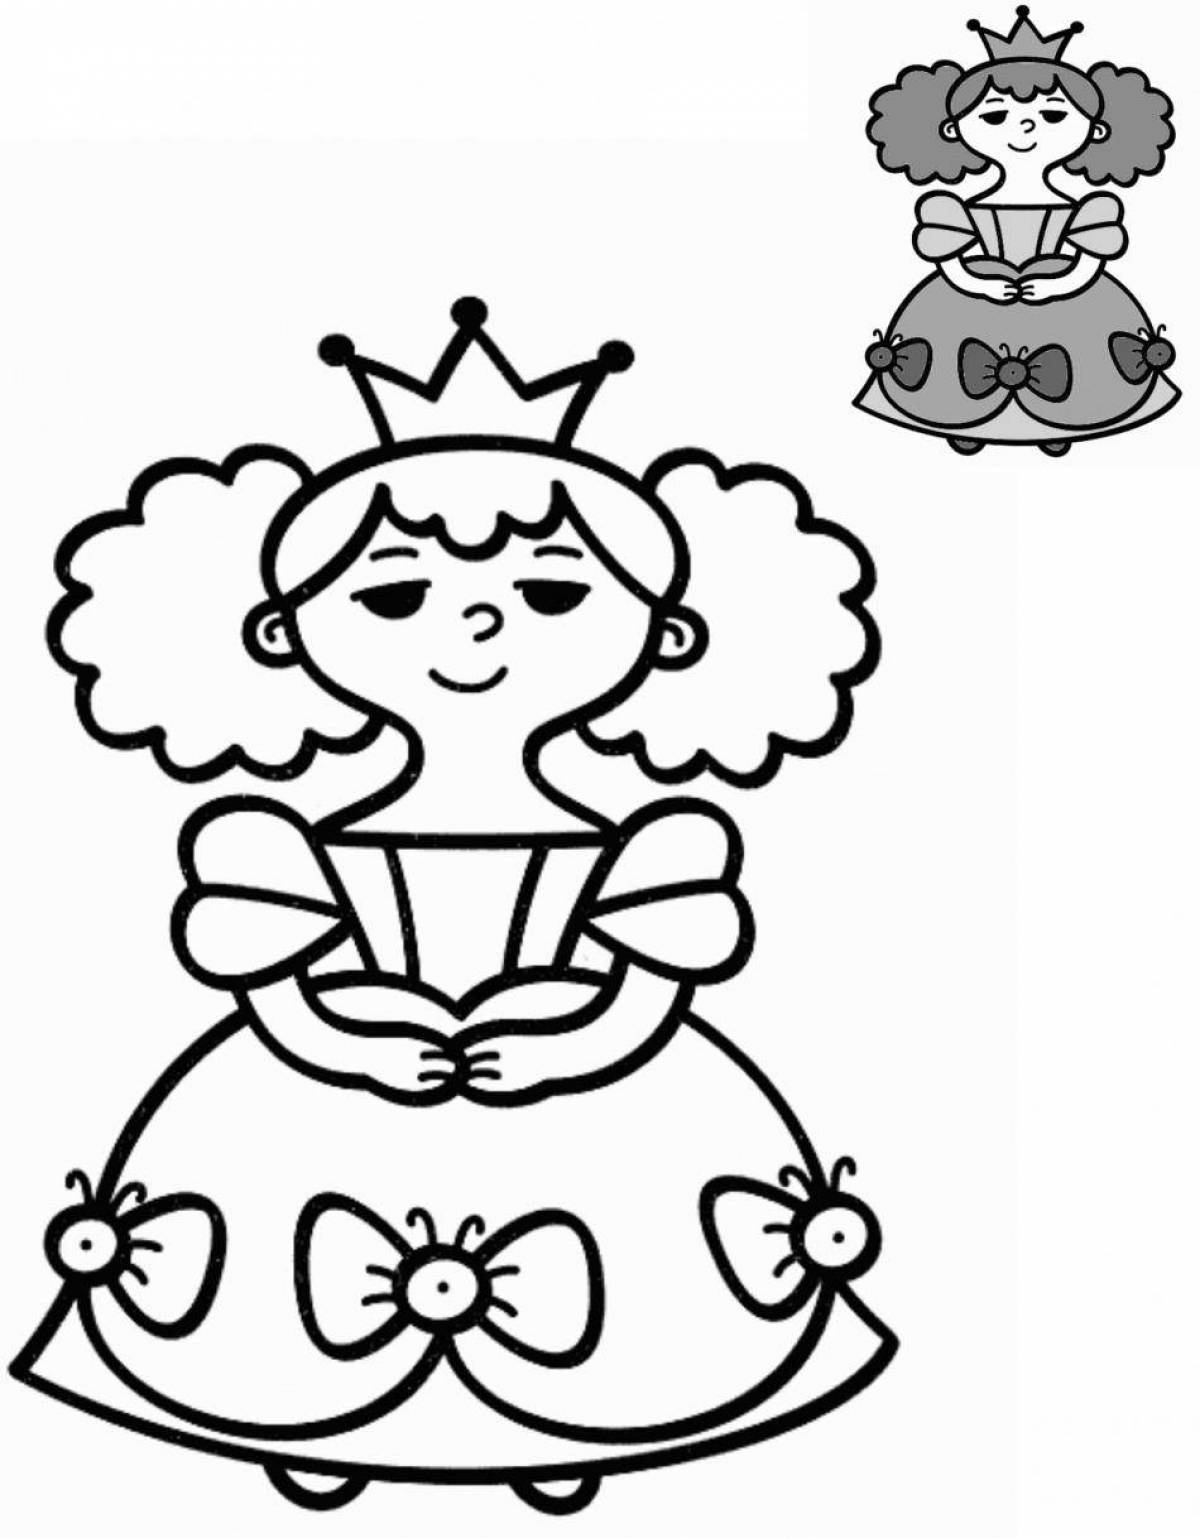 Violent coloring for girls princesses 3-4 years old